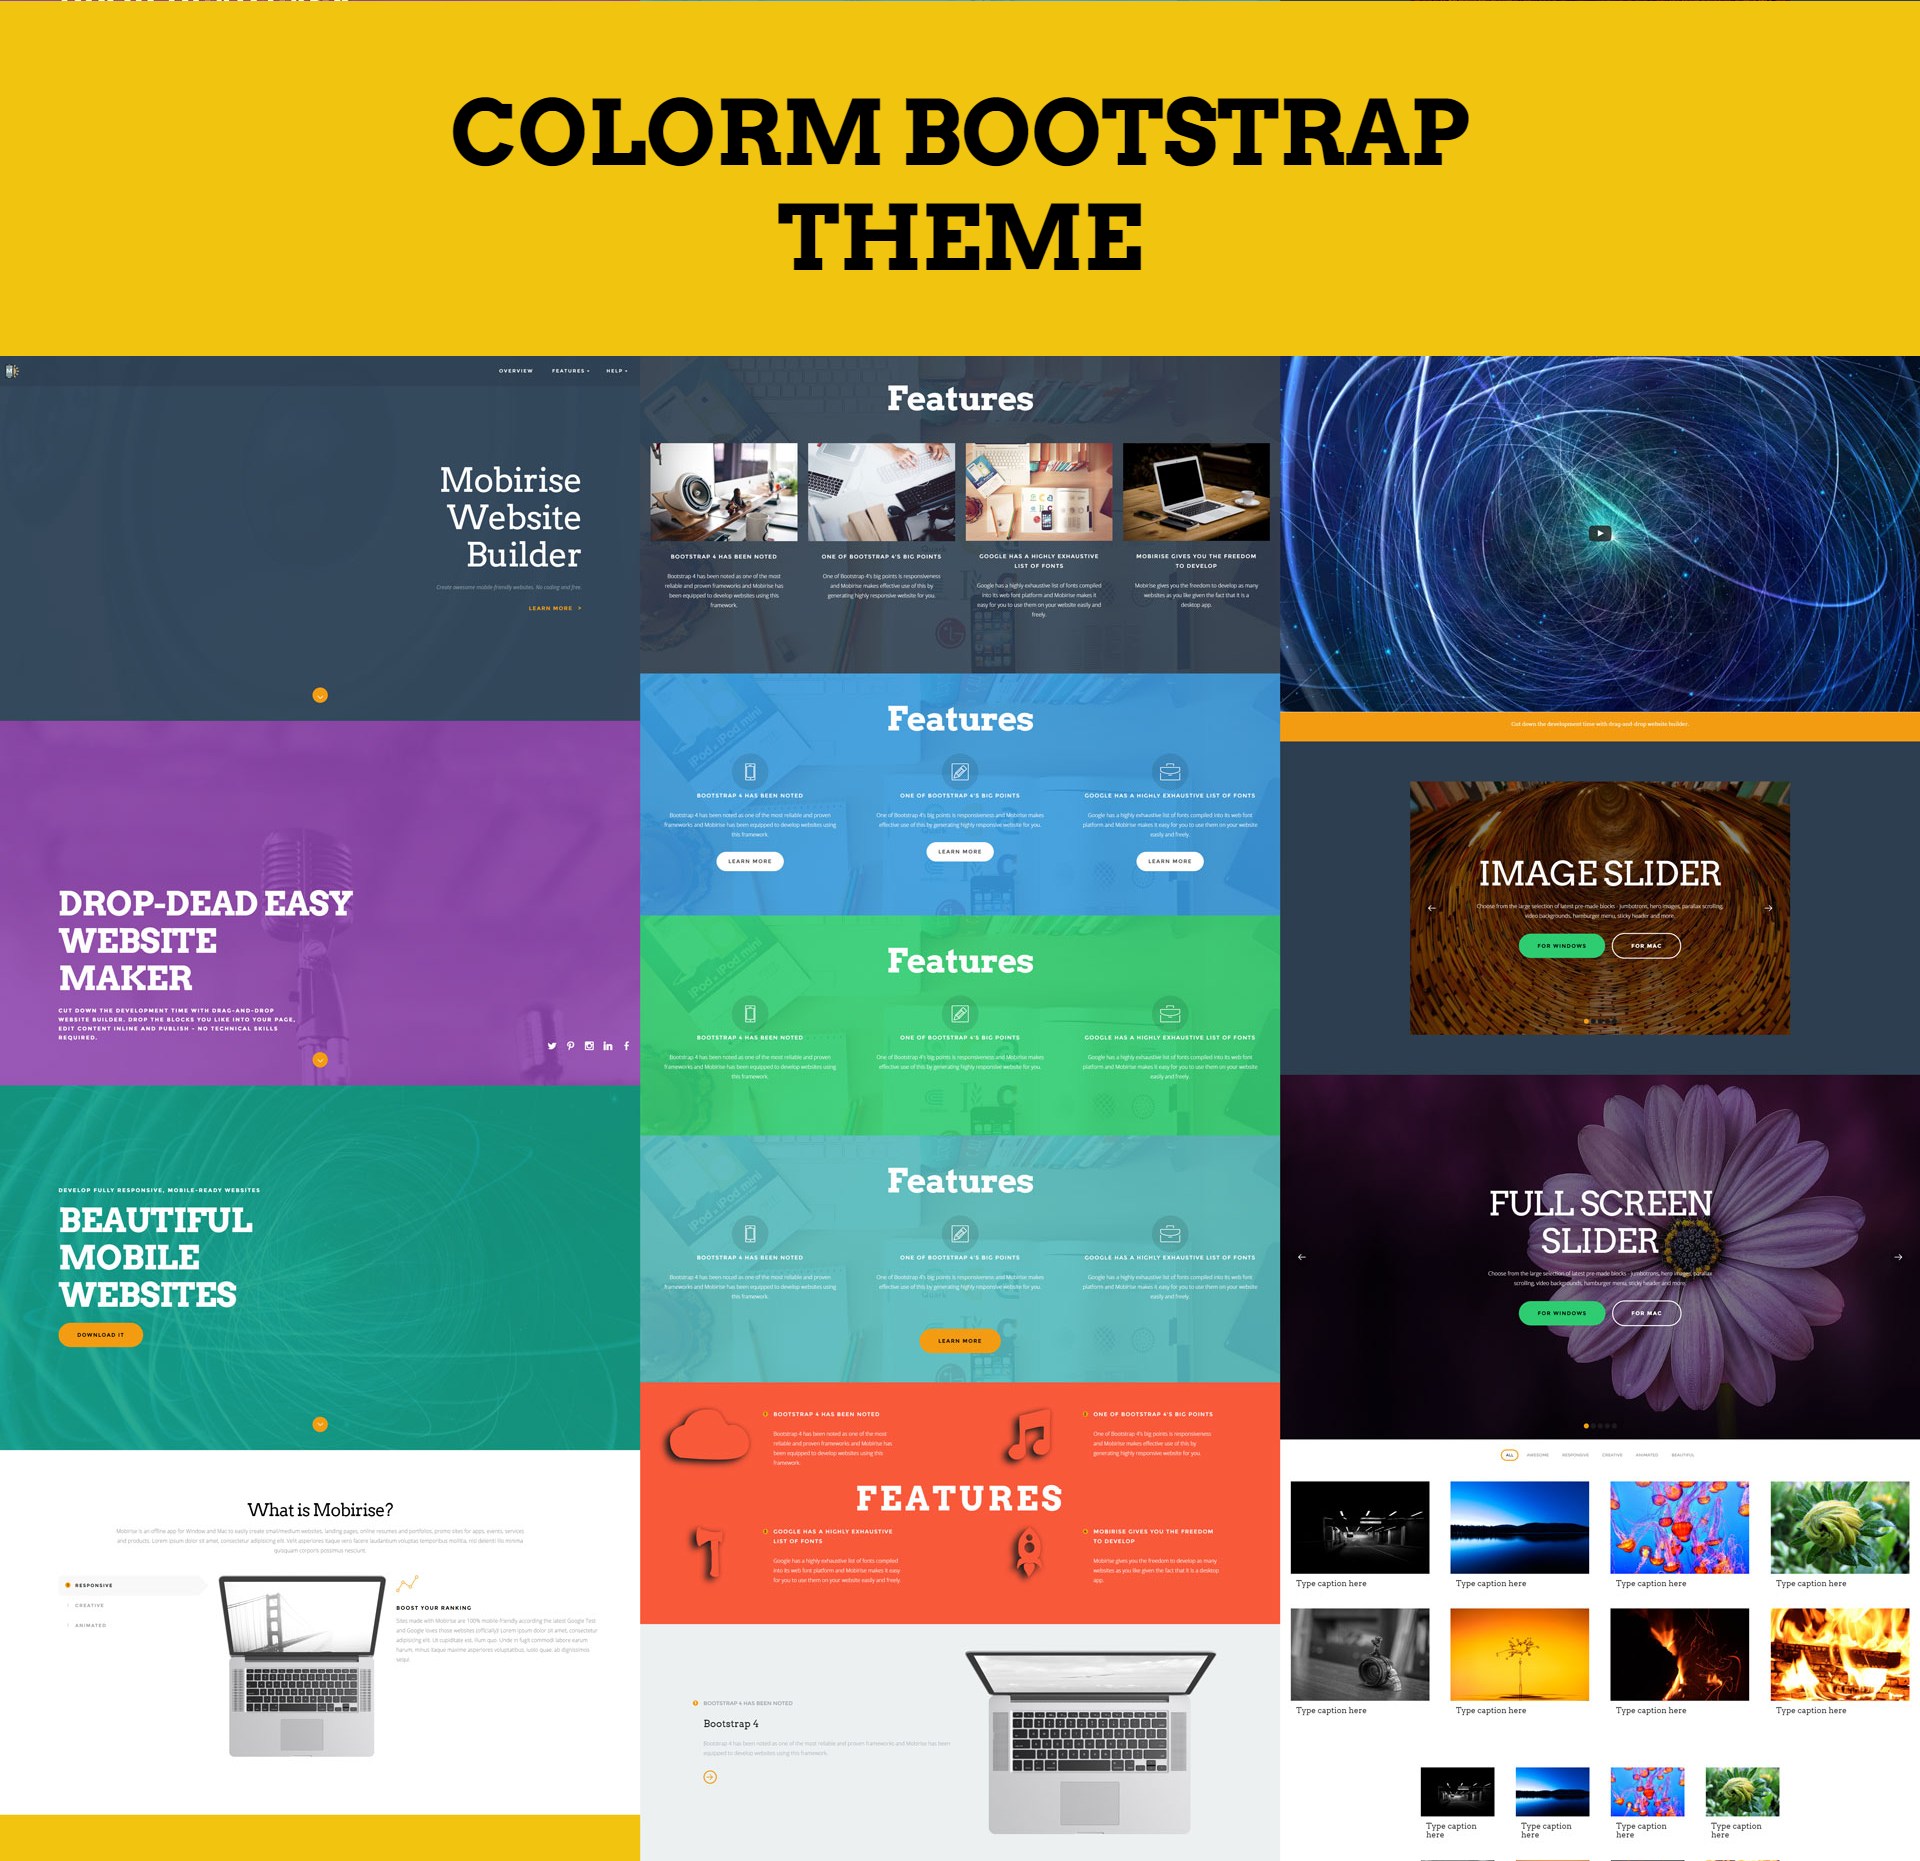 95-free-bootstrap-themes-expected-to-get-in-the-top-in-2019